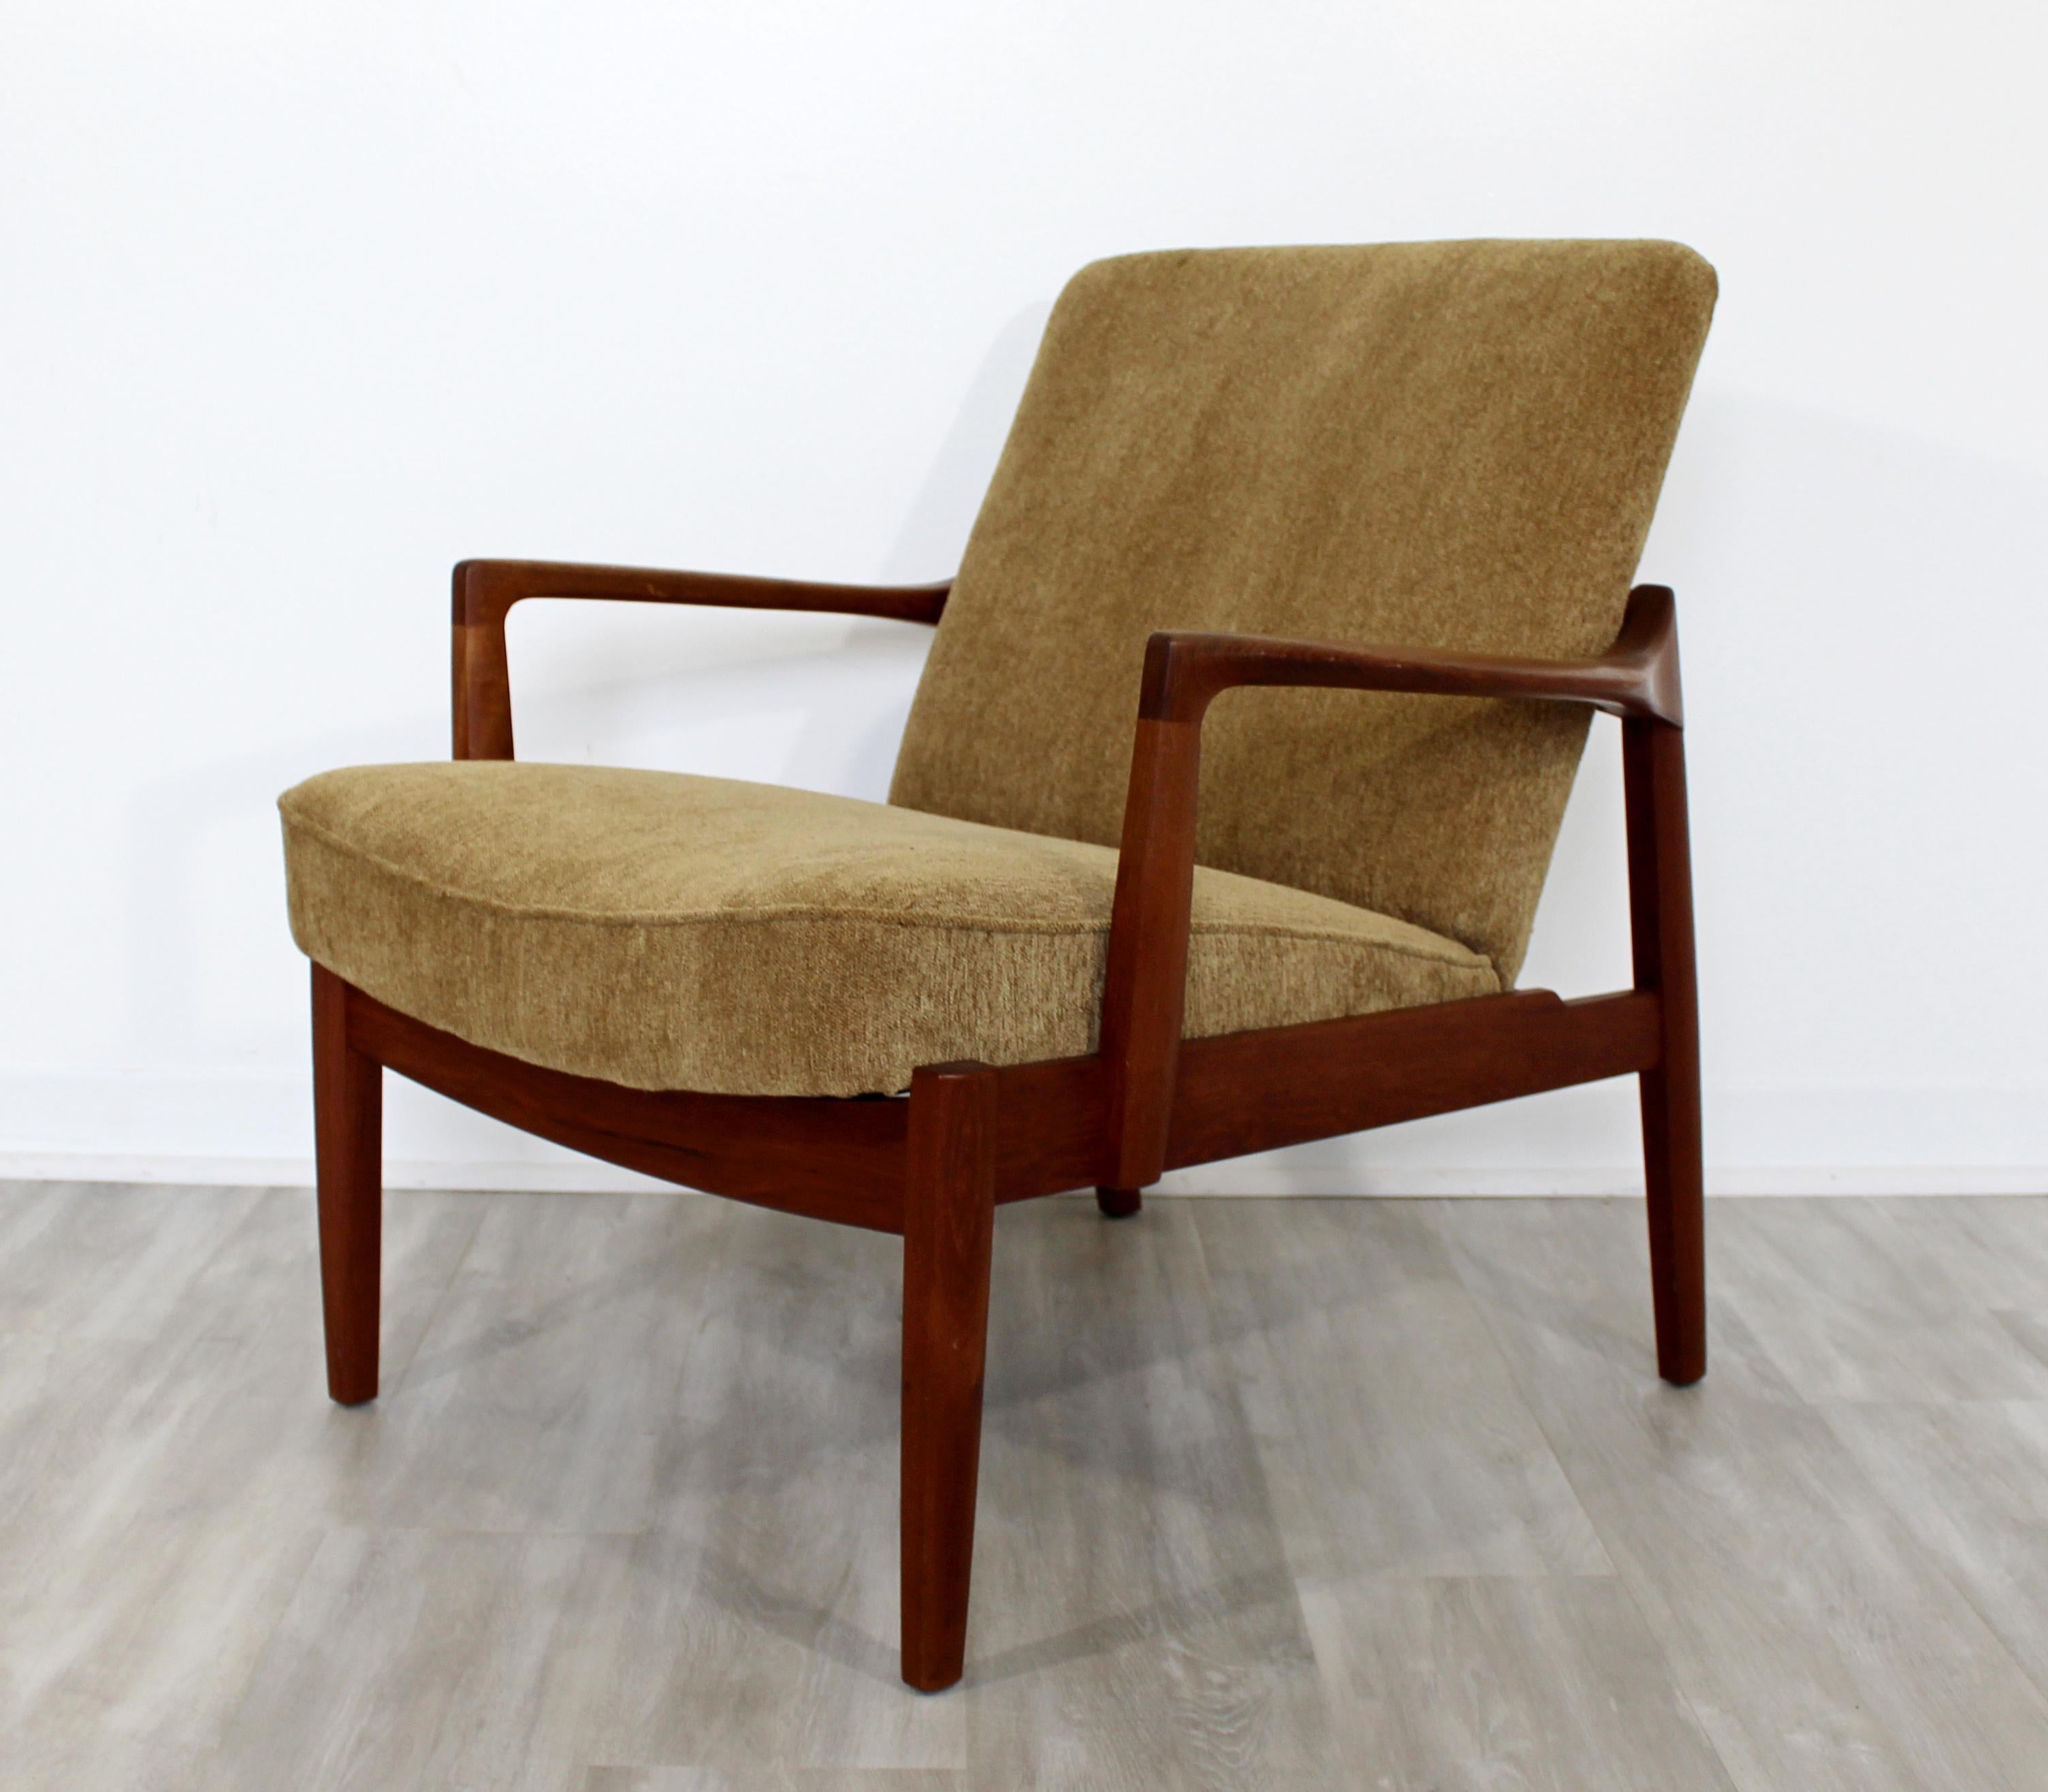 For your consideration is an incredible, Danish teak armchair, 135 teak lounge chair by Tove & Edvard Kindt-Larsen for France & Søn, circa 1950s. In excellent condition. The cushions have recently been professionally reupholstered. The dimensions